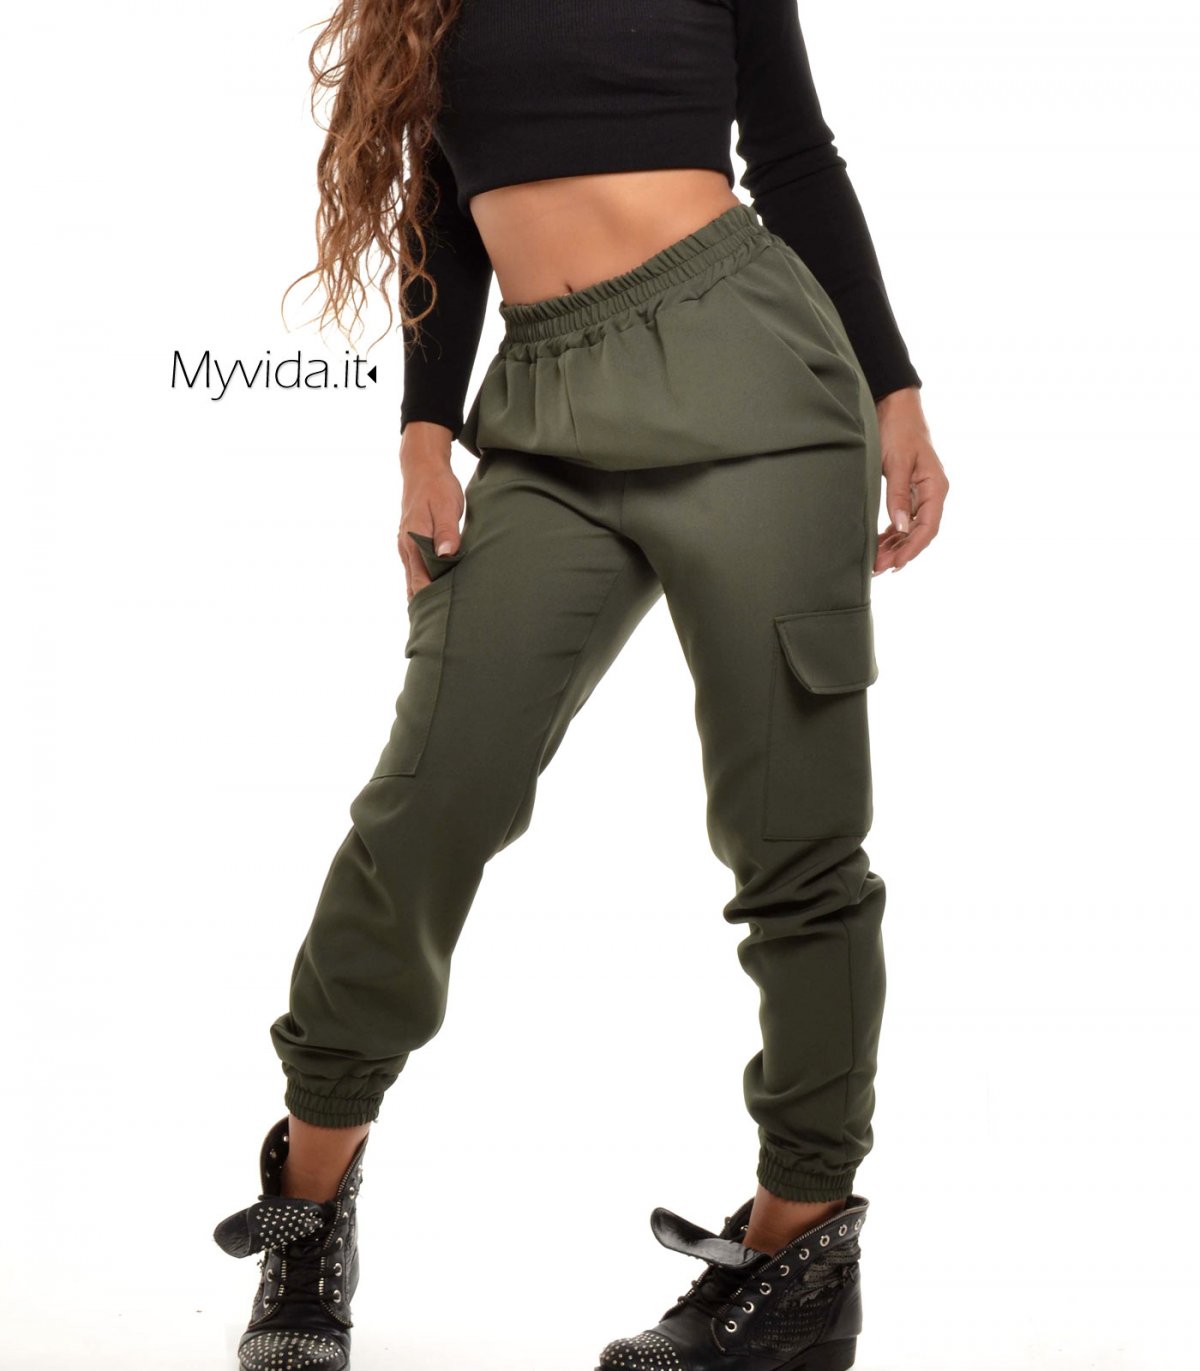 https://www.myvida.it/files/styles/zoom/public/images/products/Pant%20cargo%20donna%20elastico%20caviglia/pant_cargo_donna_elastico_caviglia_4.jpg?itok=eN4F7zjL